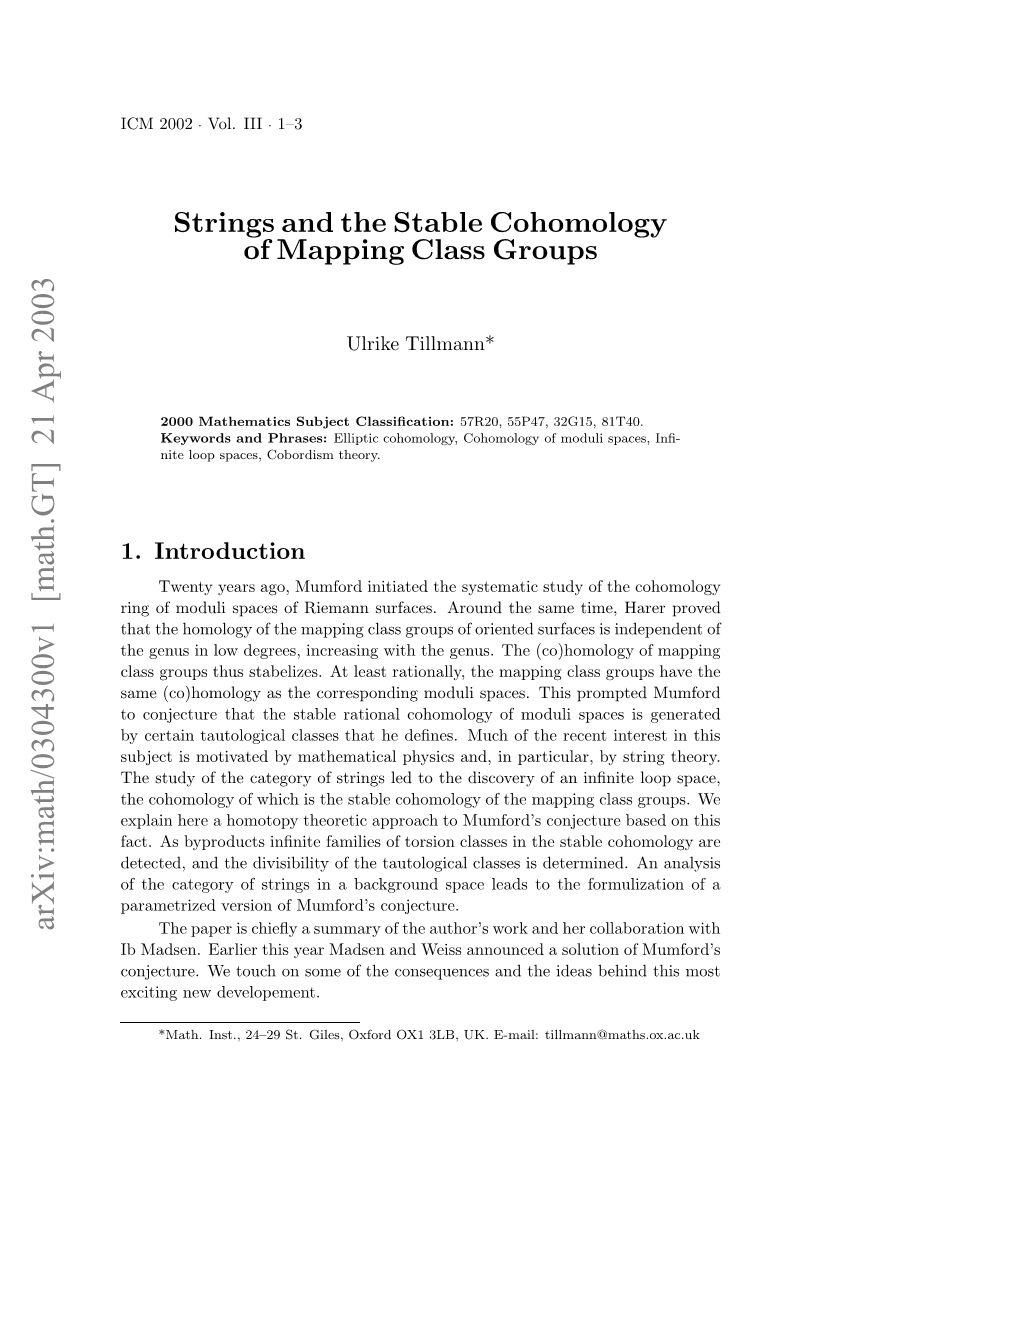 Strings and the Stable Cohomology of Mapping Class Groups 449 3